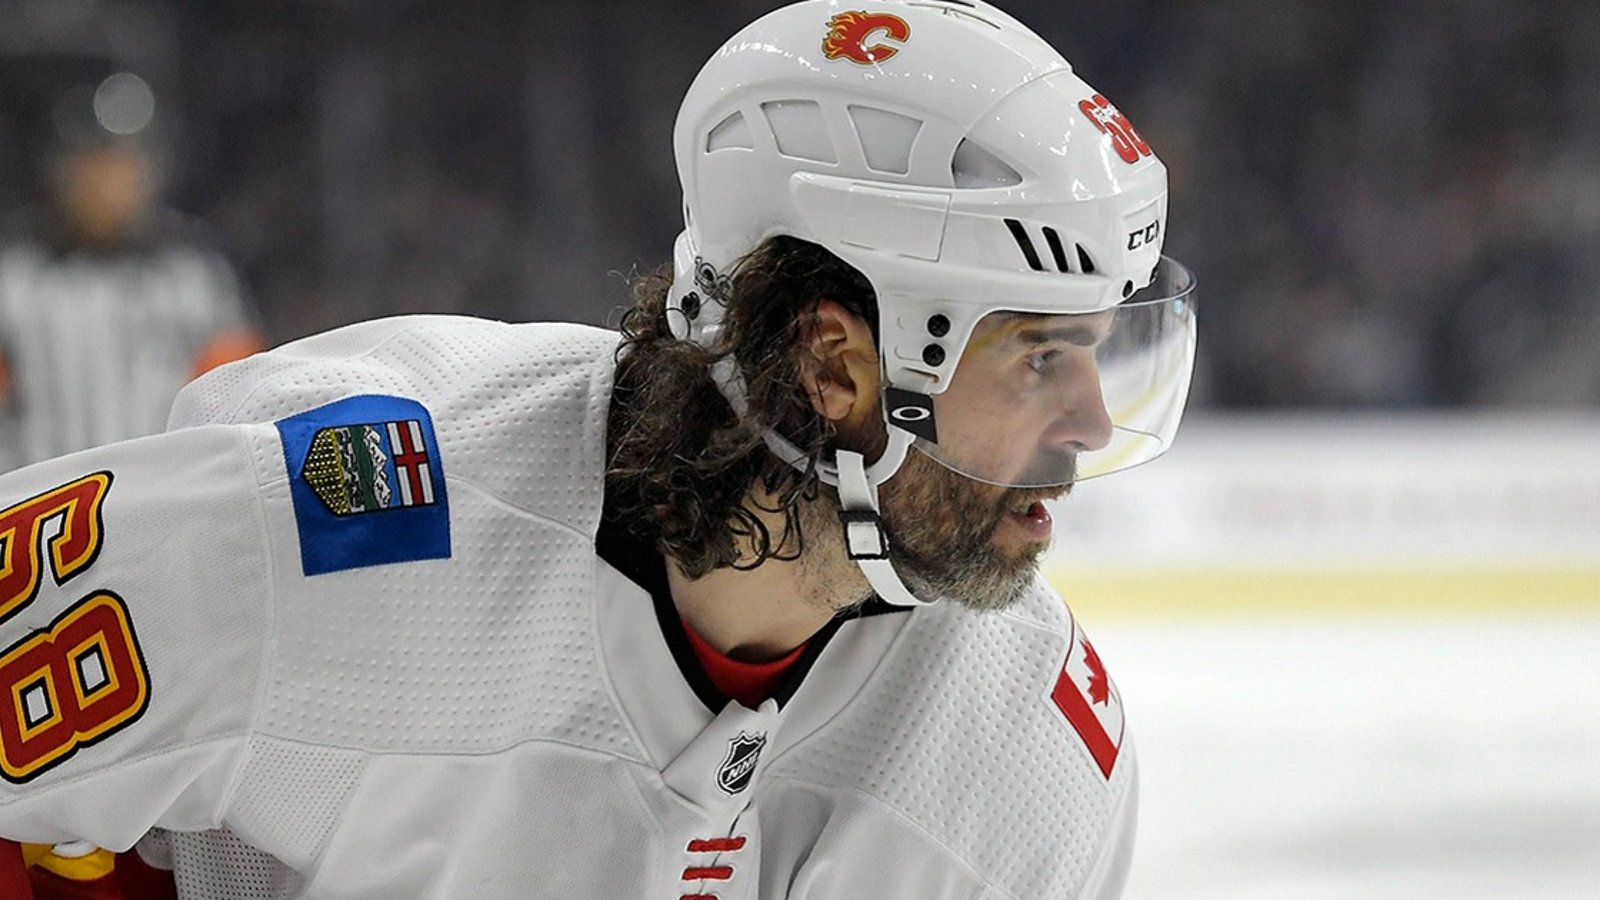 Breaking: Jagr may be paired up with Calgary's top two stars.